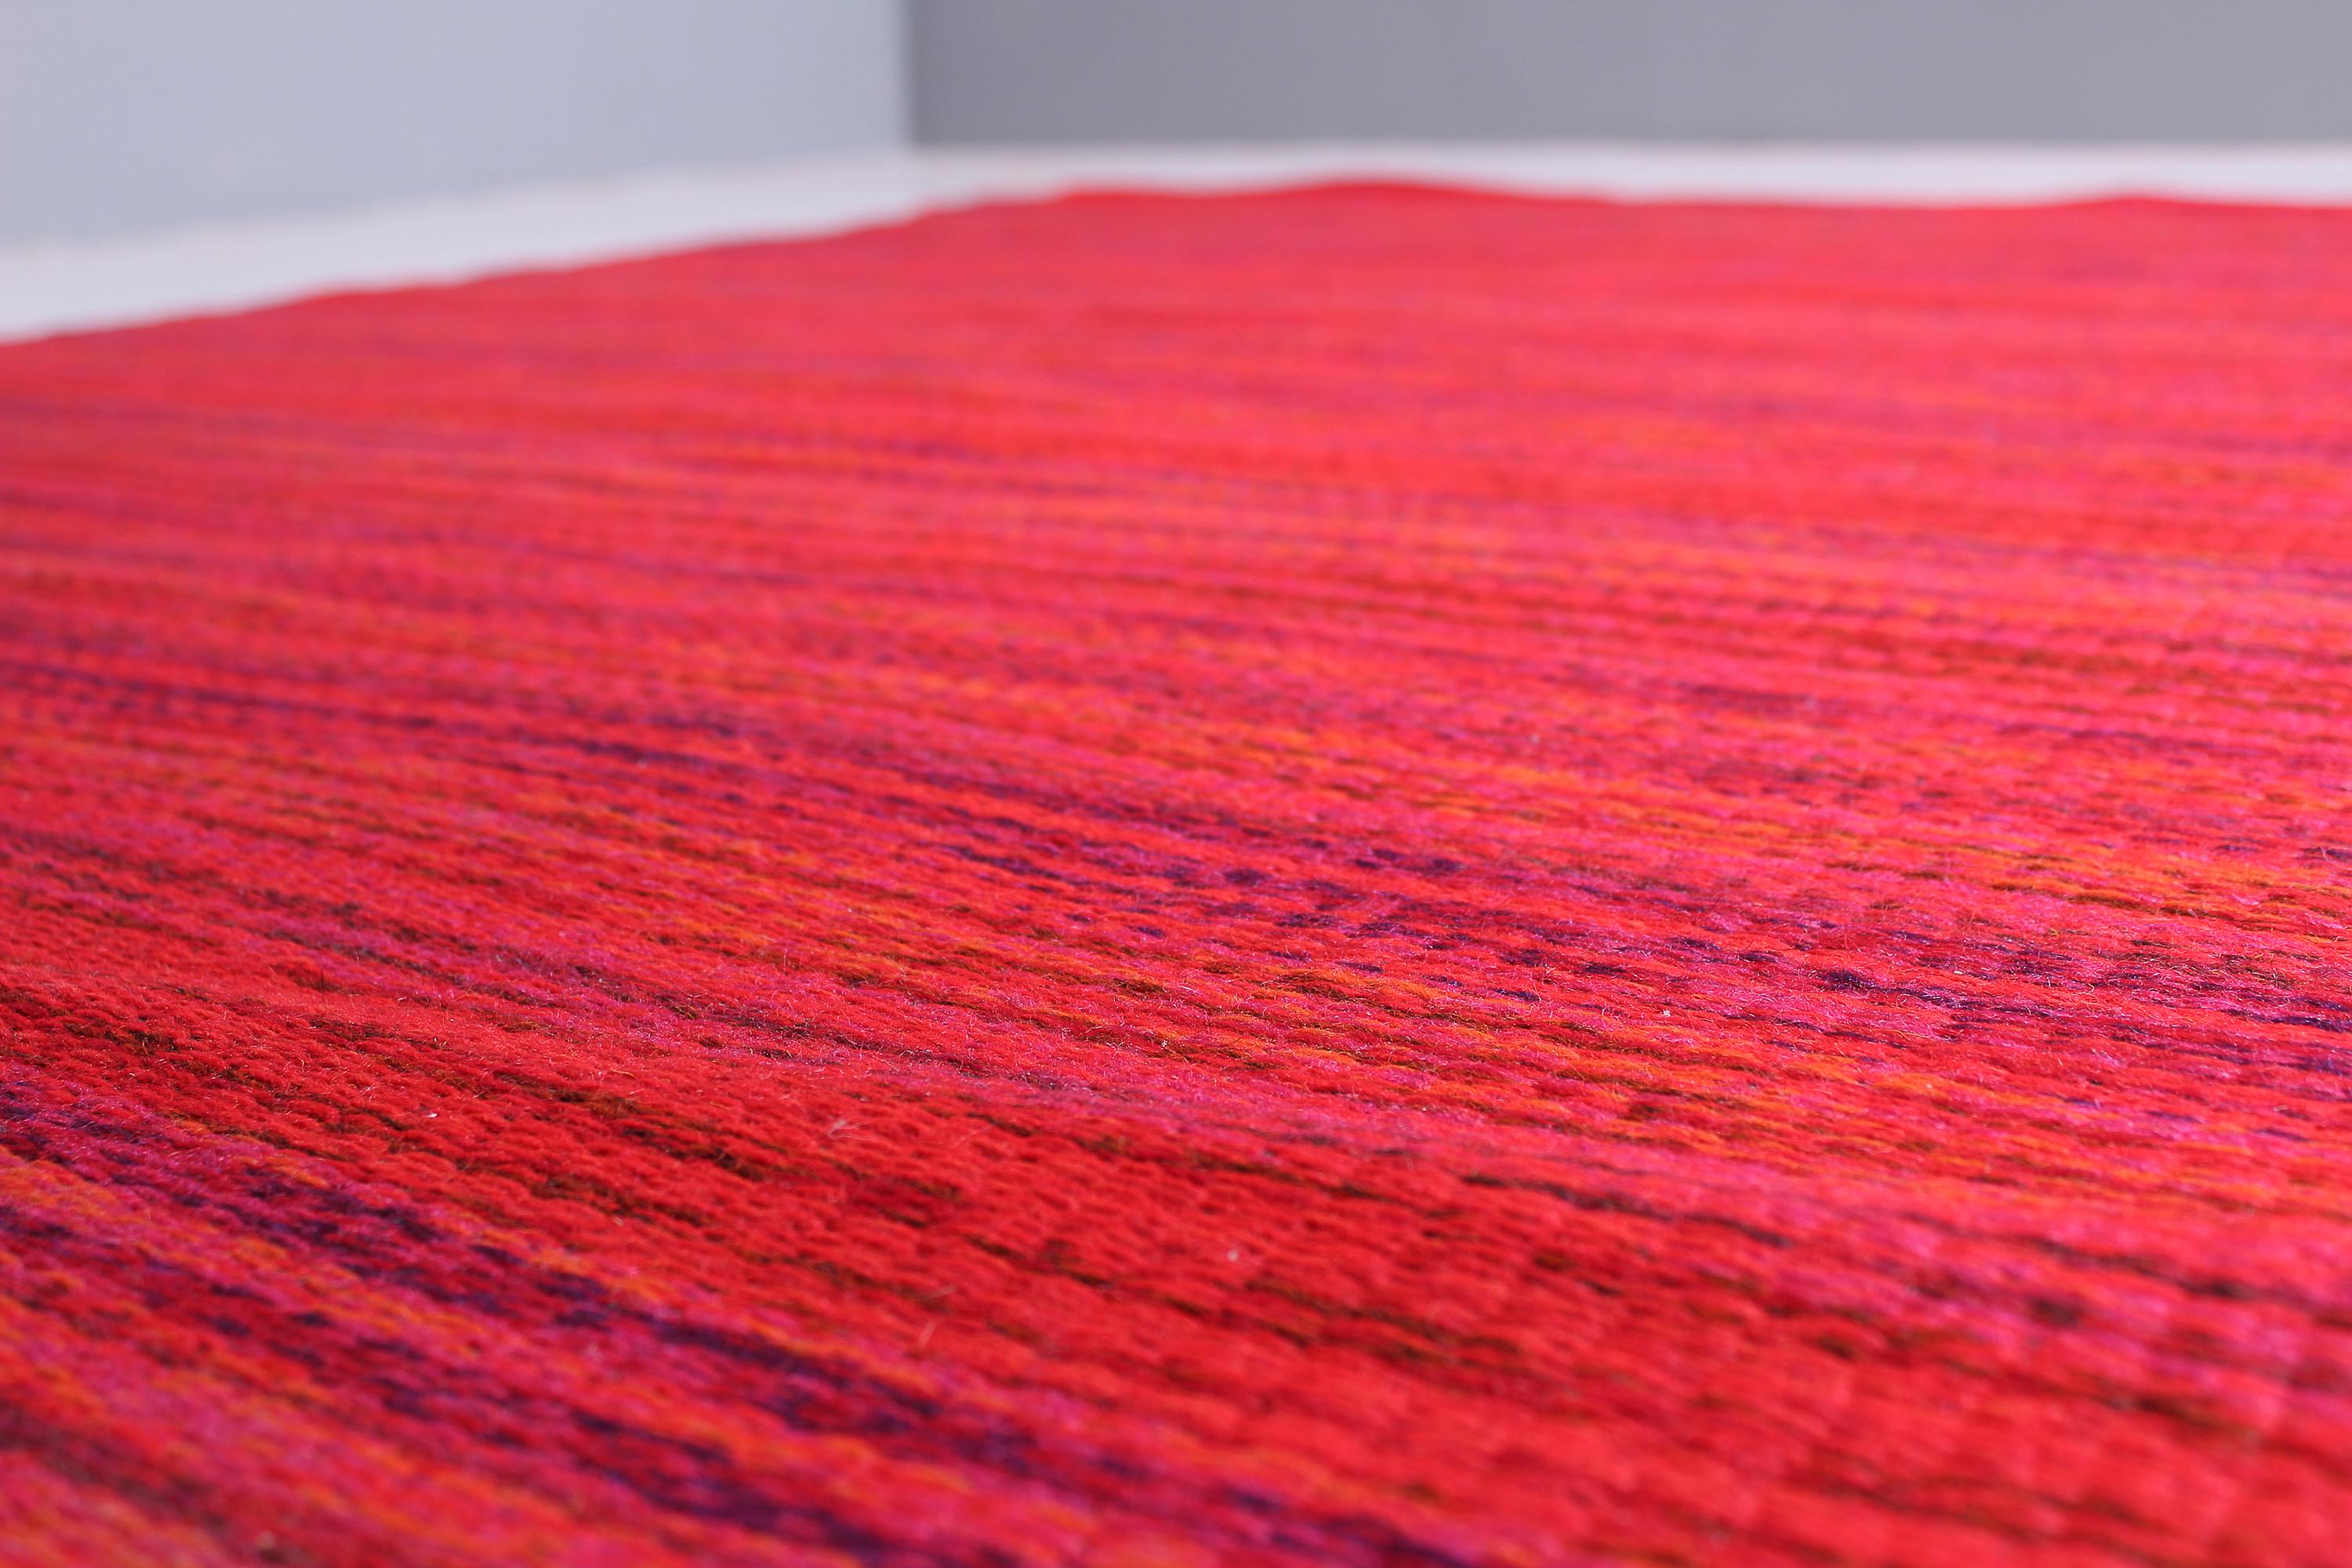 Mid-20th Century Midcentury Swedish Red Carpet, 1960s For Sale